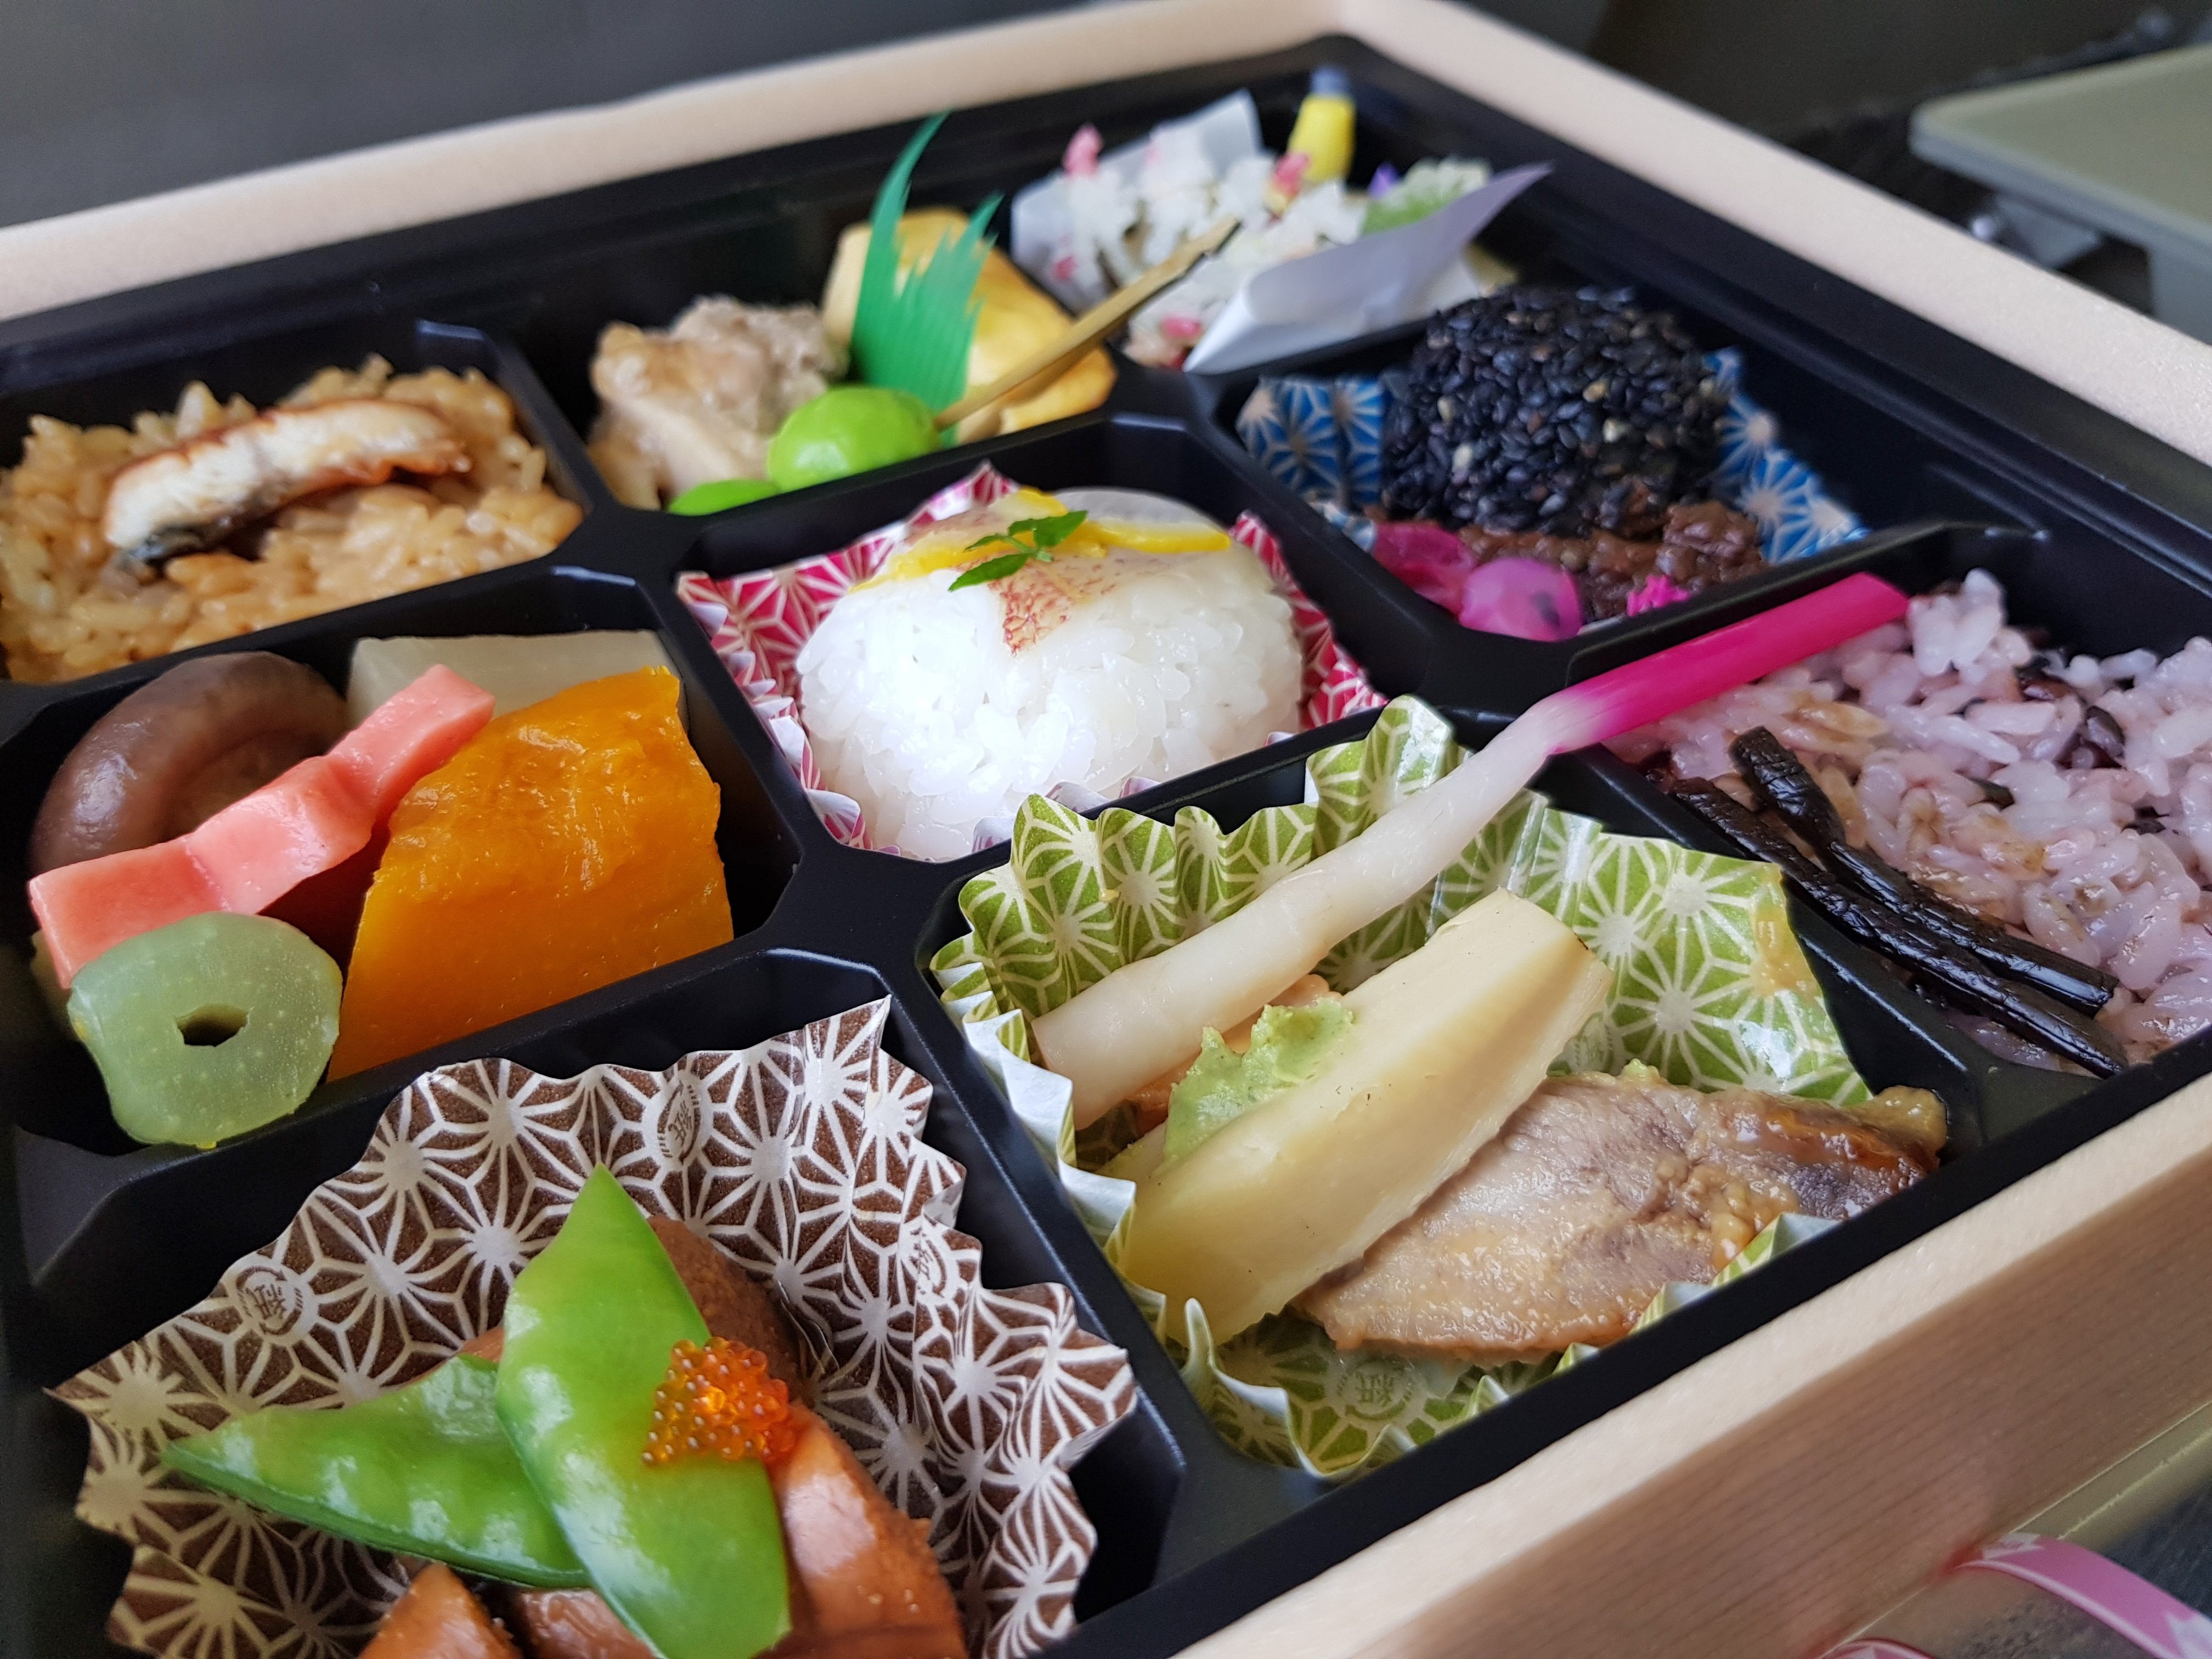 BEST SHOP IN TOKYO TO BUY A JAPANESE BENTO LUNCH BOX!